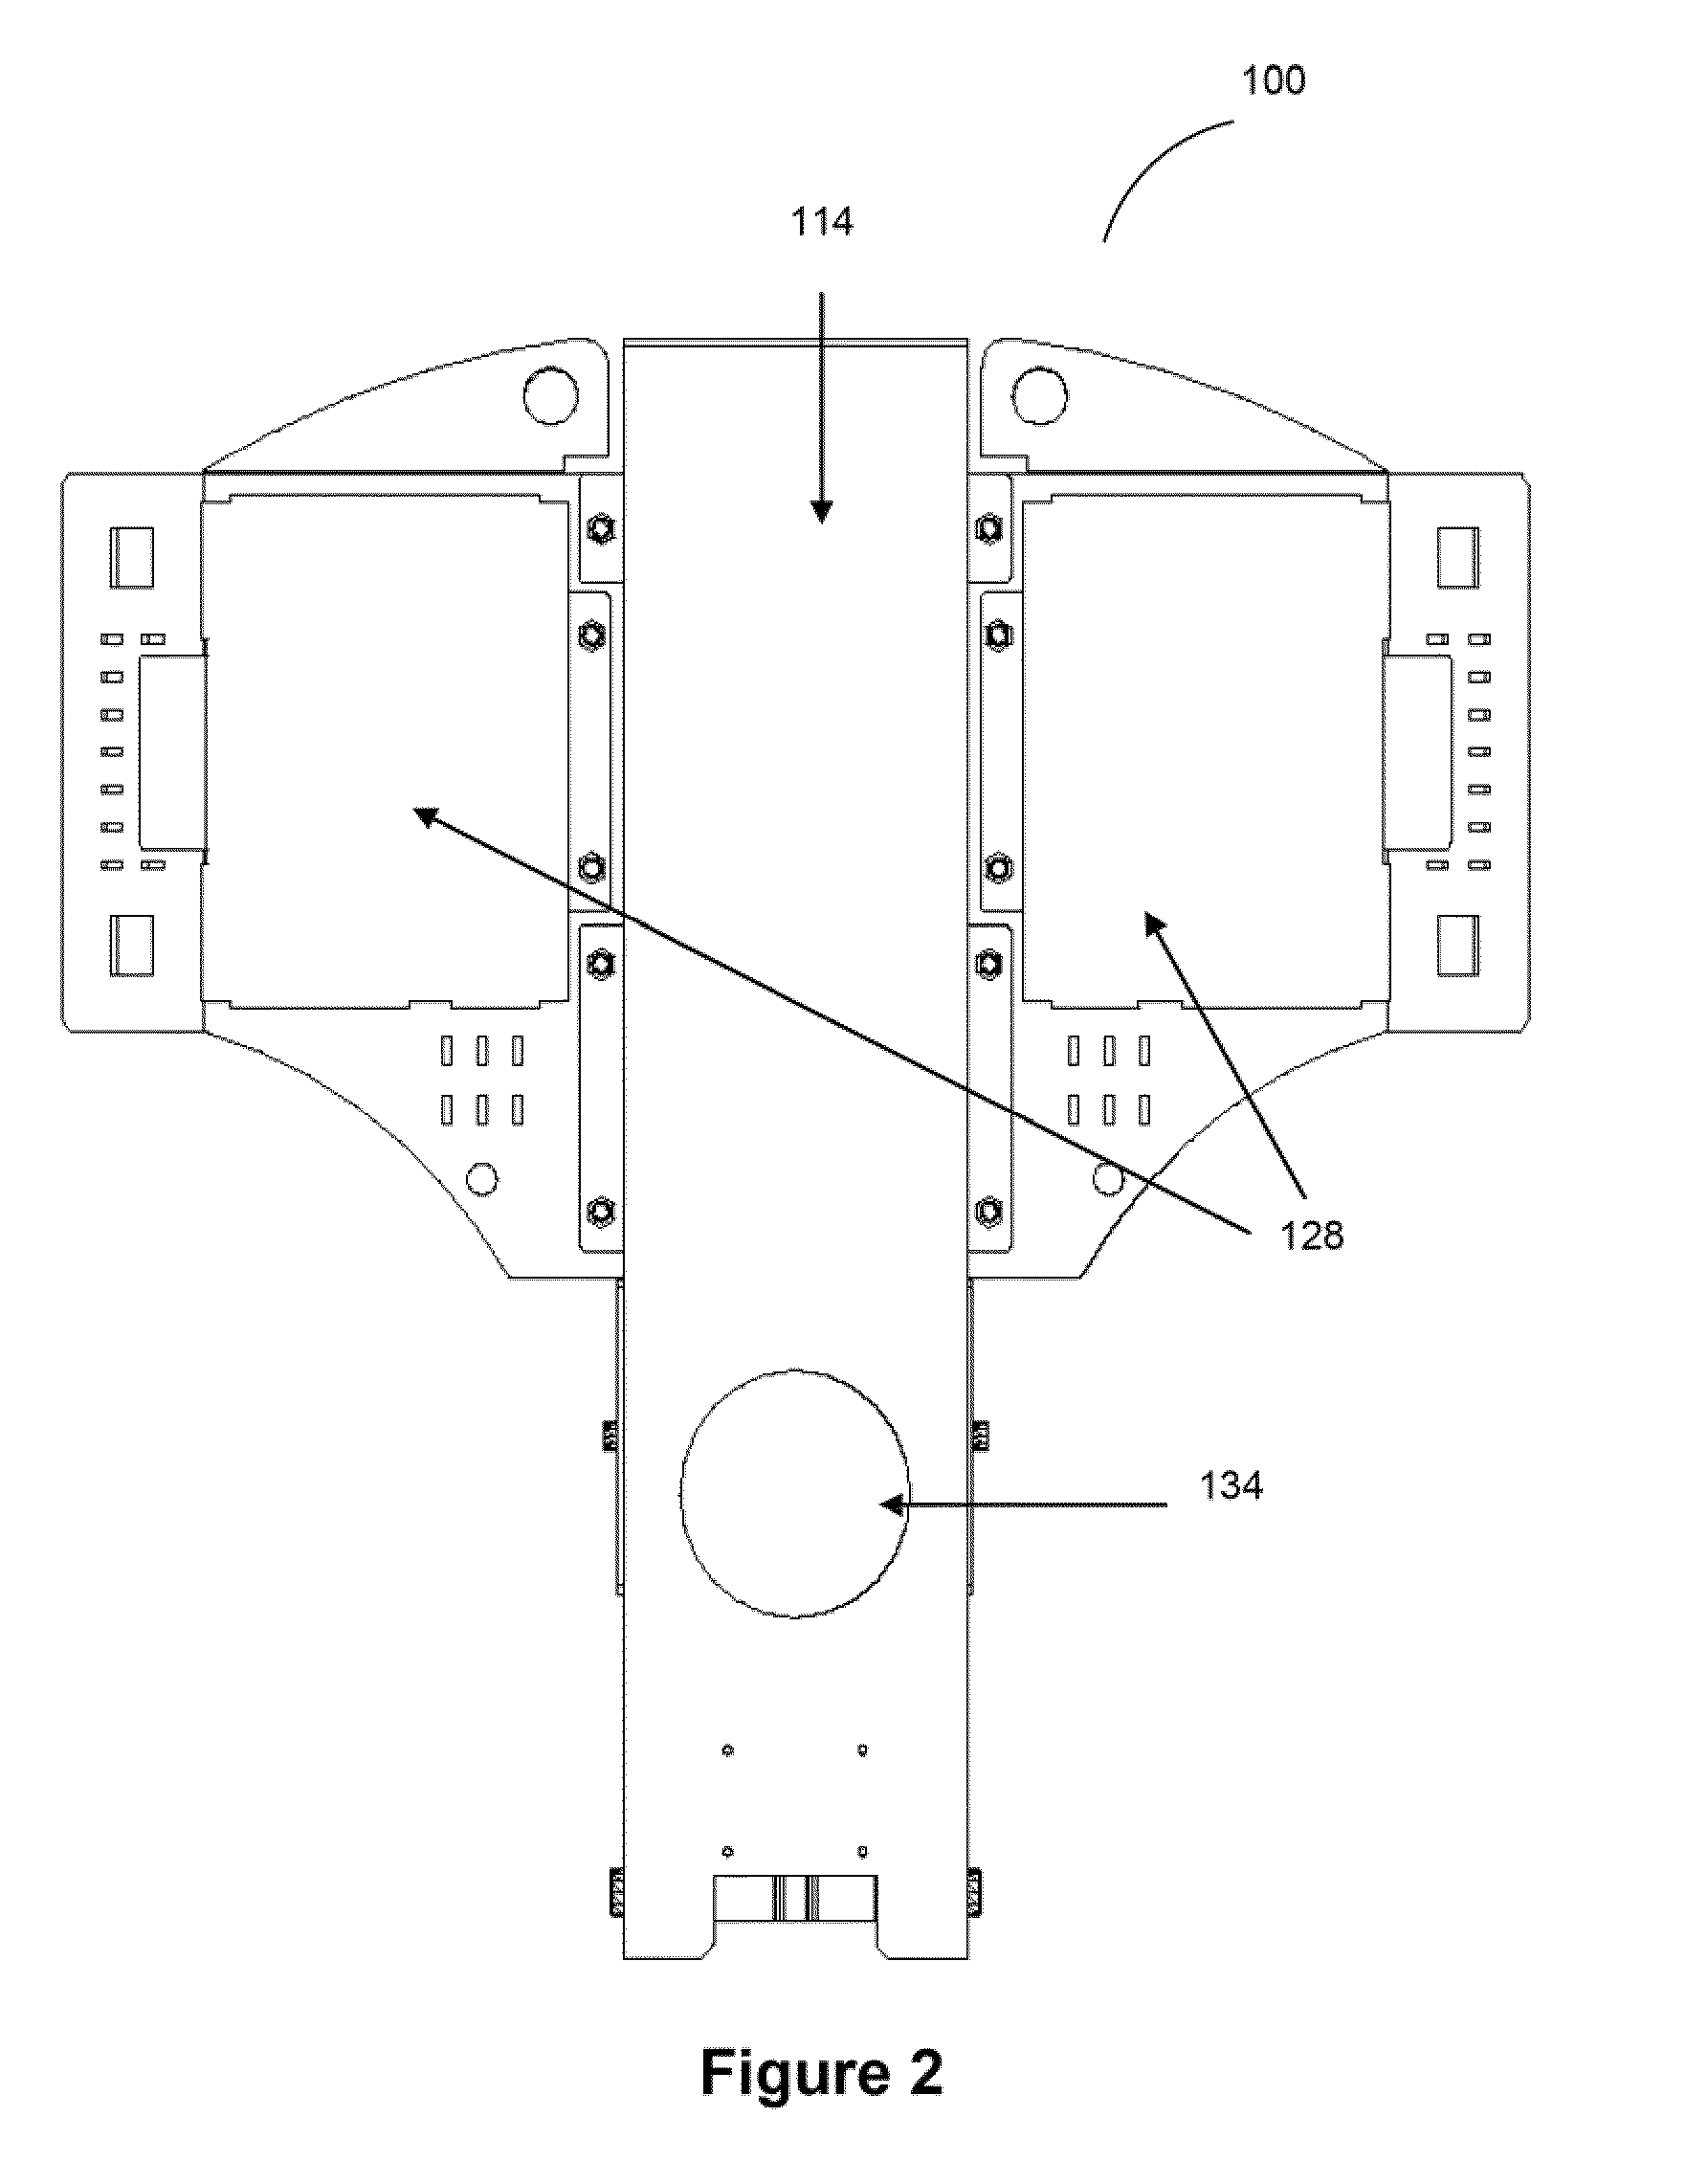 Solid-state lighting apparatus